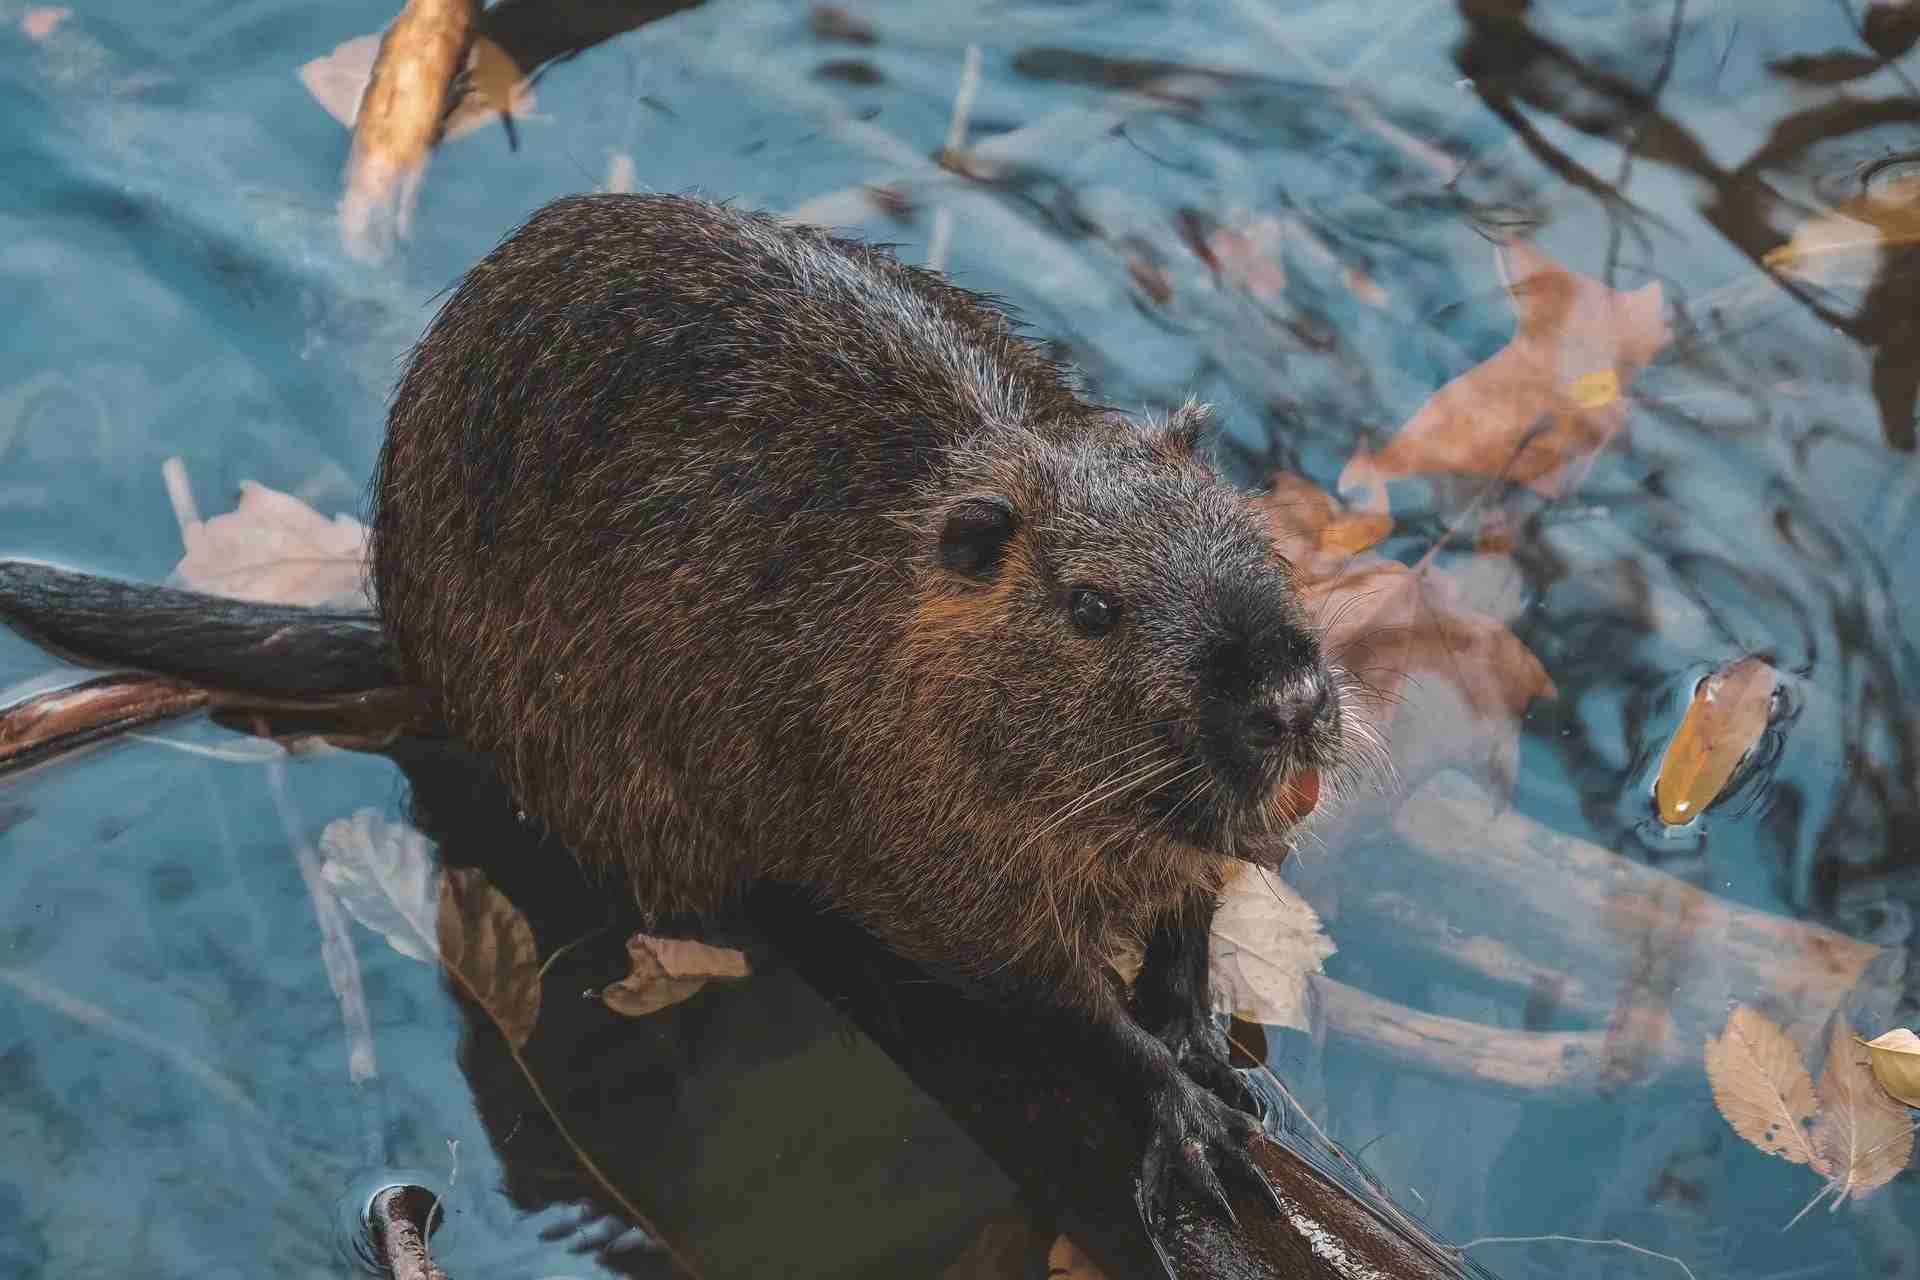 The characteristics of beavers and muskrats are similar